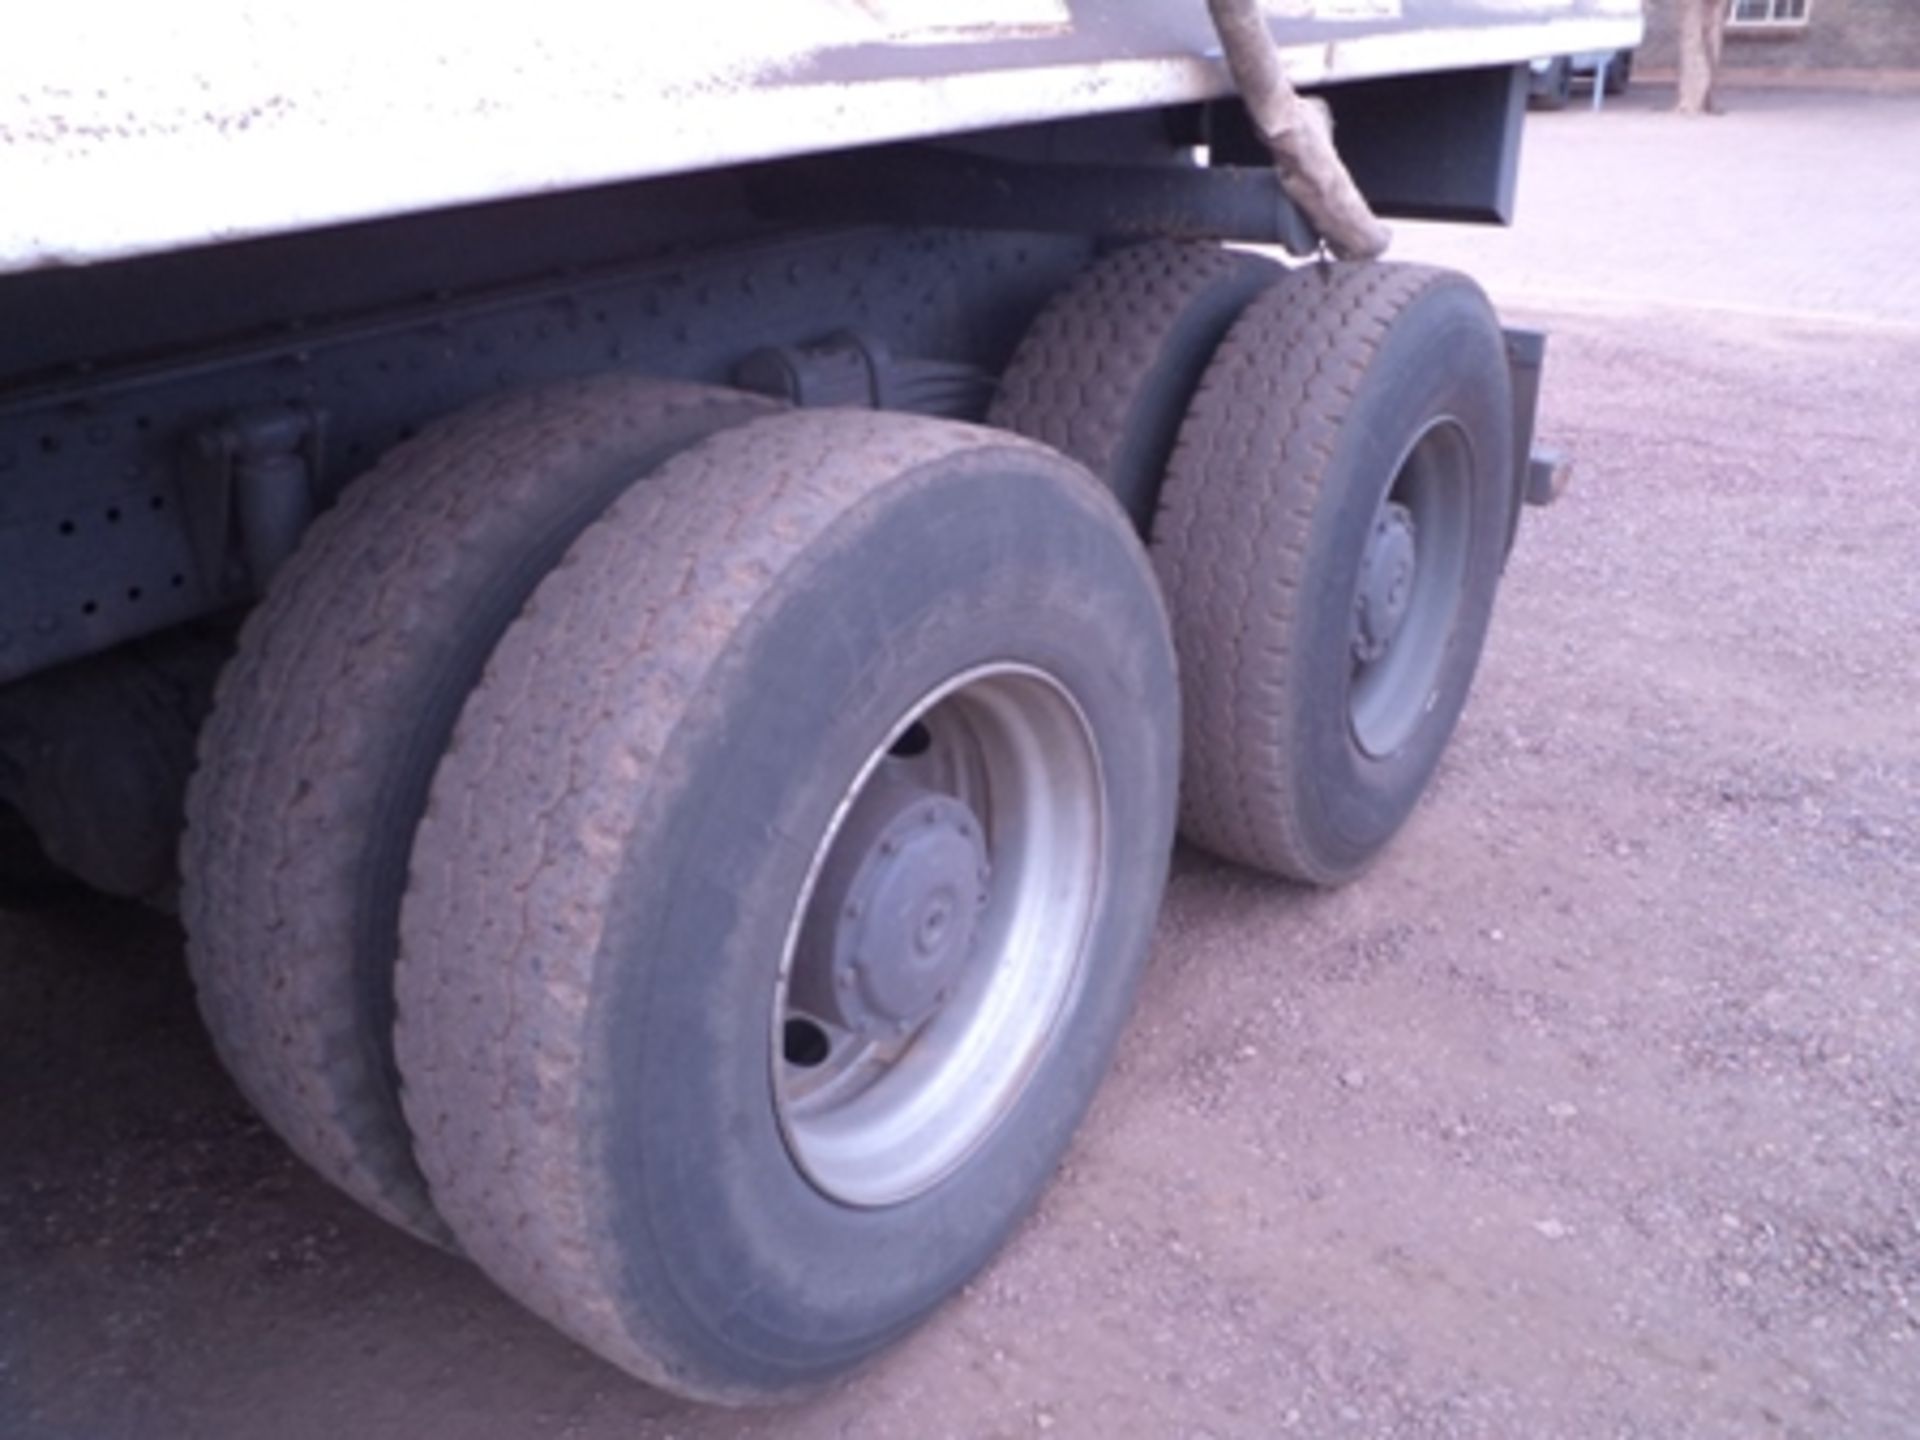 2003 MERCEDES BENZ ACTROS 3335 10M³ TIPPER TRUCK  KM 345362(23 ASBES STR, KATHU  NORTHERN CAPE) - Image 6 of 9